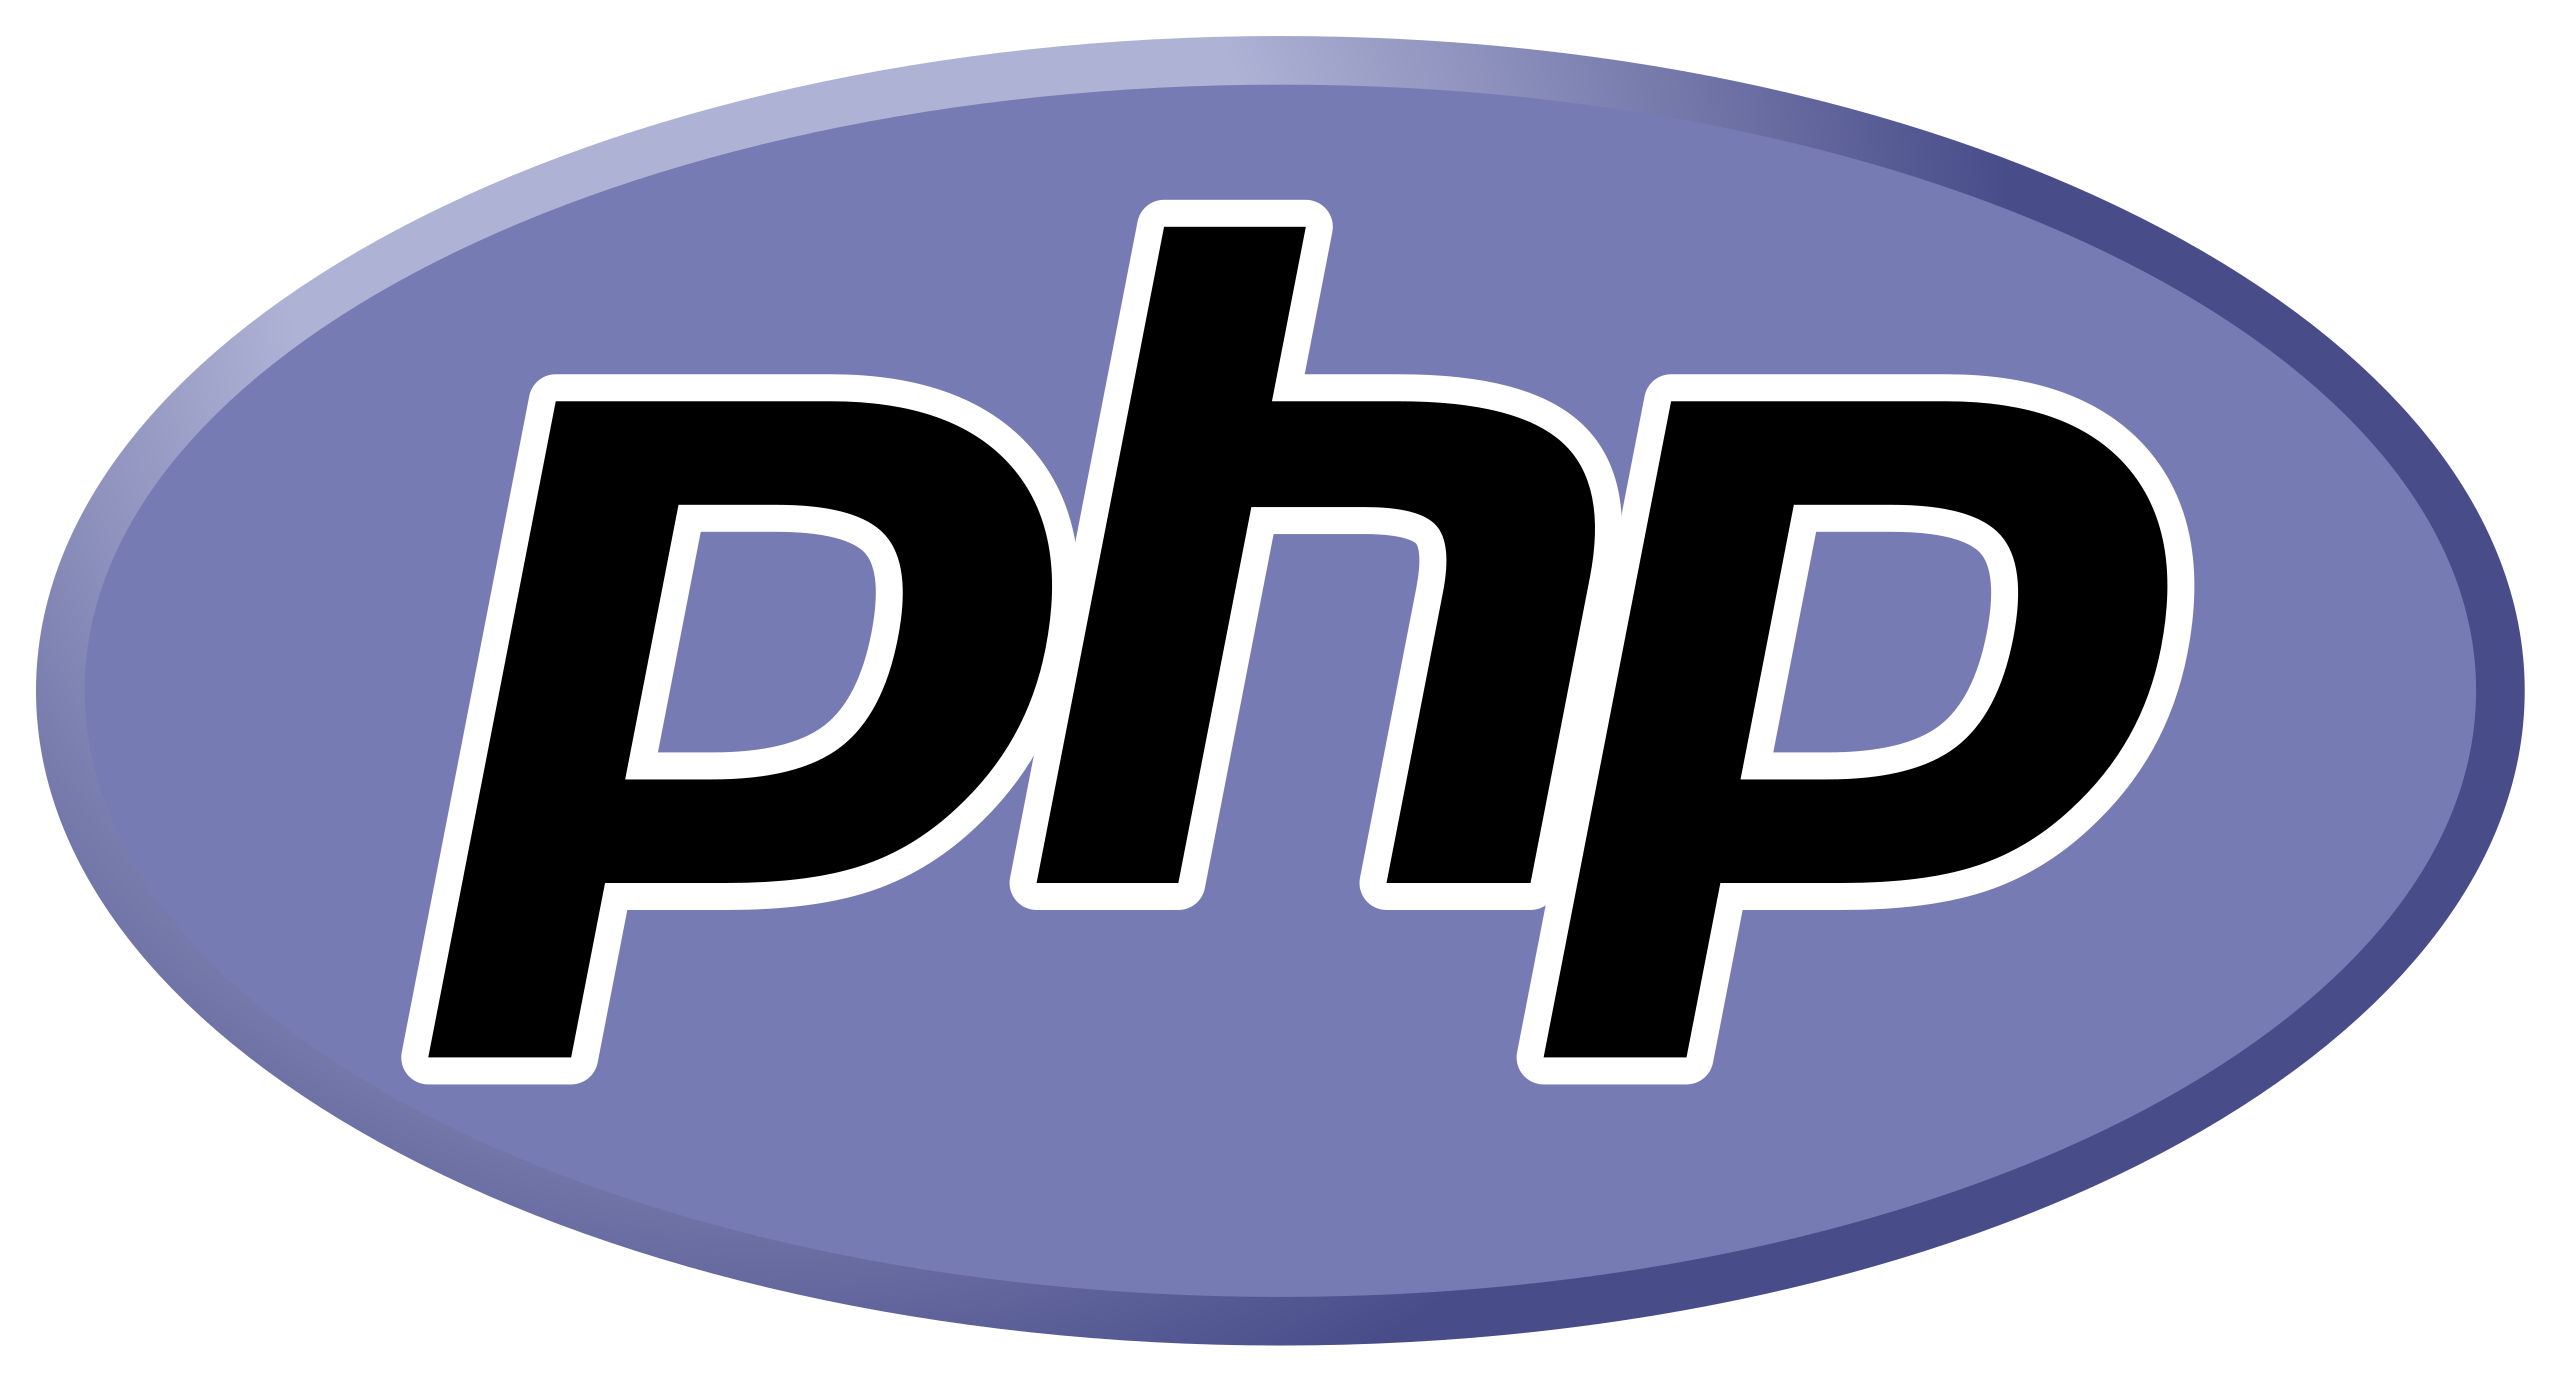 The PHP logo